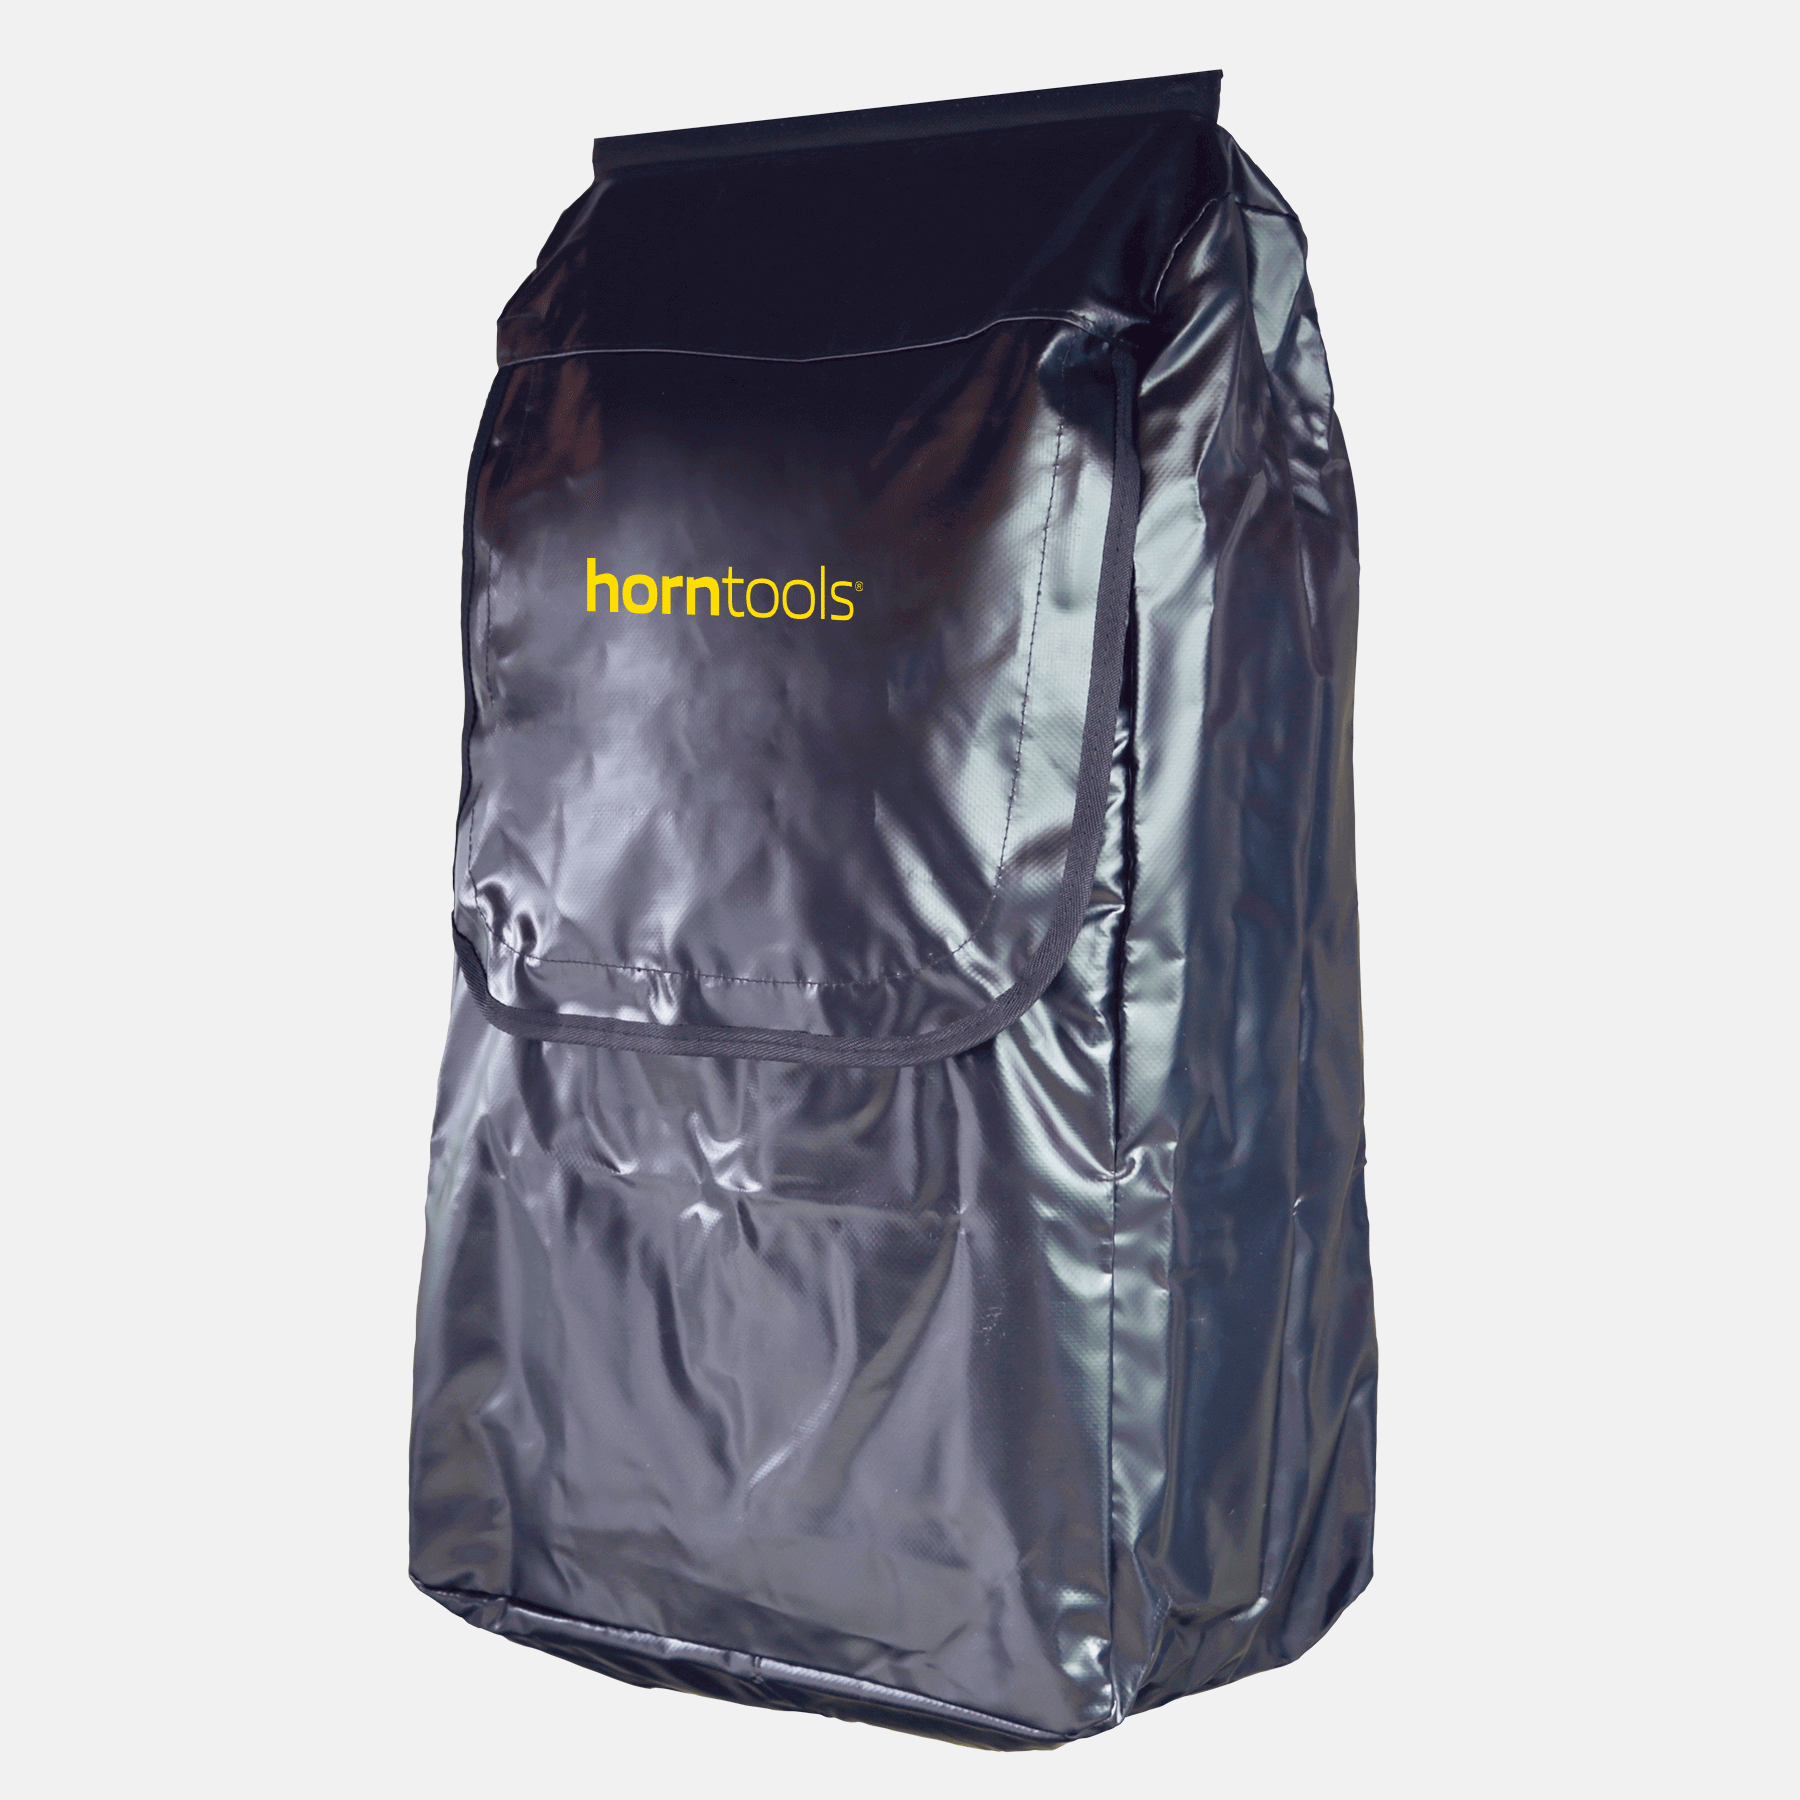 Shoe bag for roof tent 